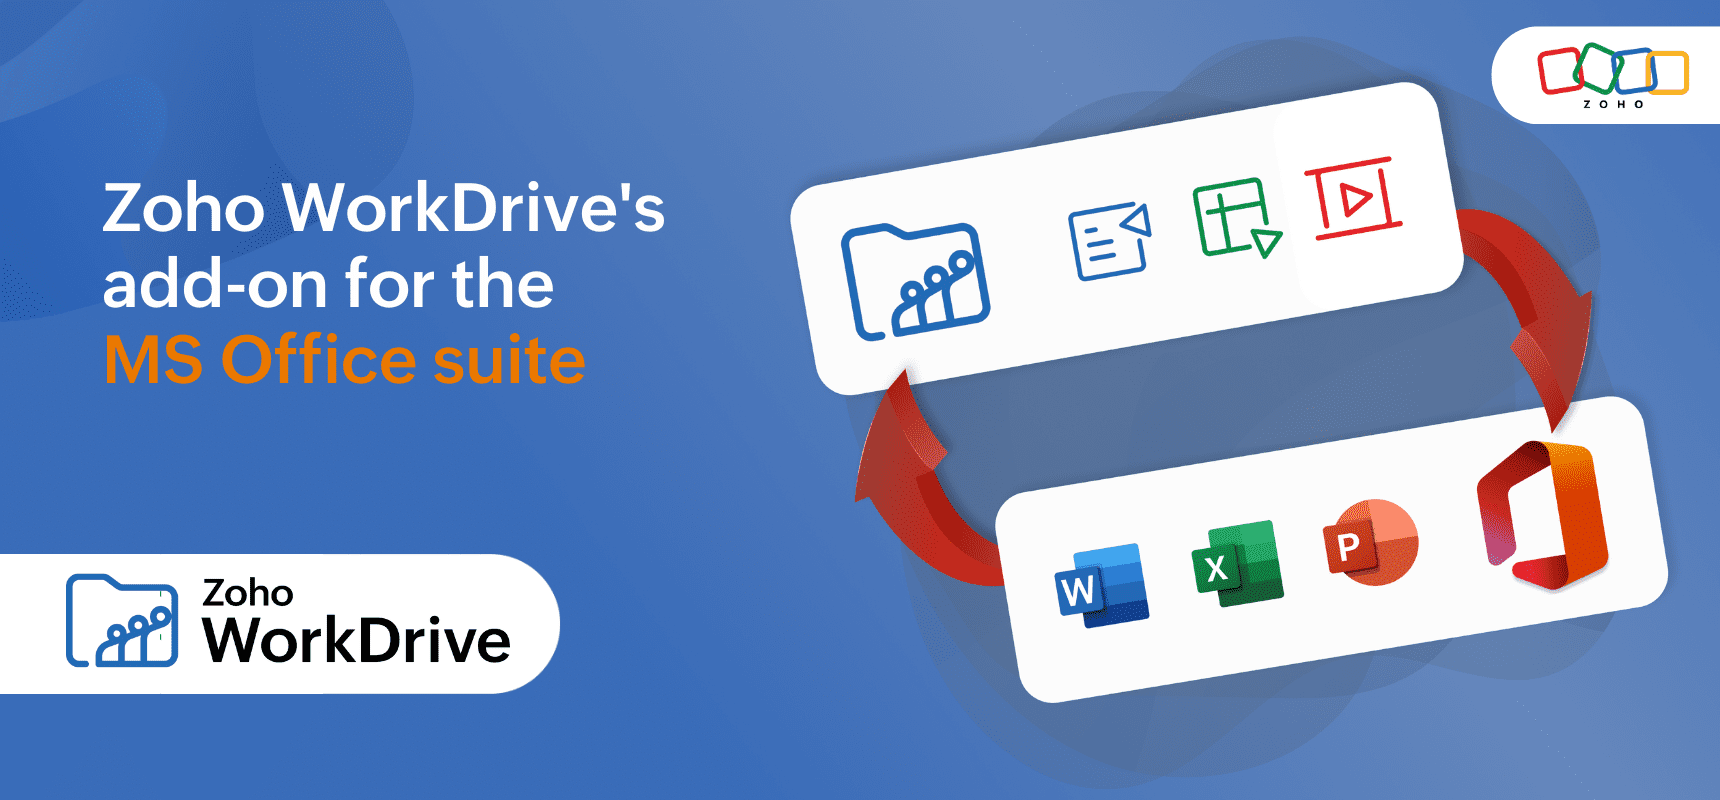 MS Office add-on for WorkDrive